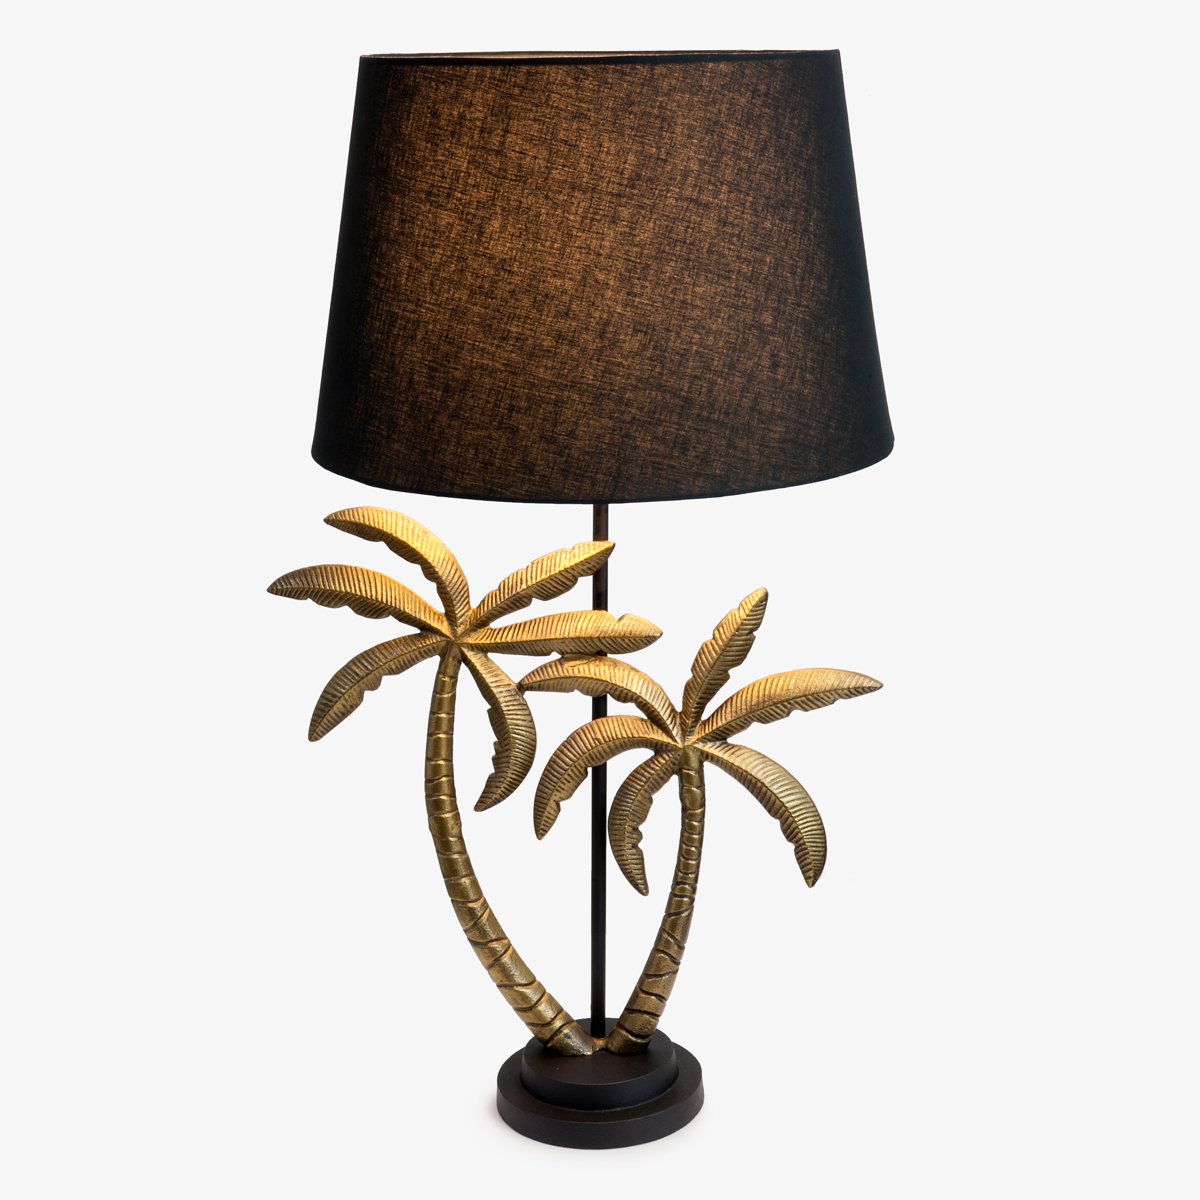 FREE SHIPPING - Modern Farmhouse Table Lamp with Antique Gold Shade